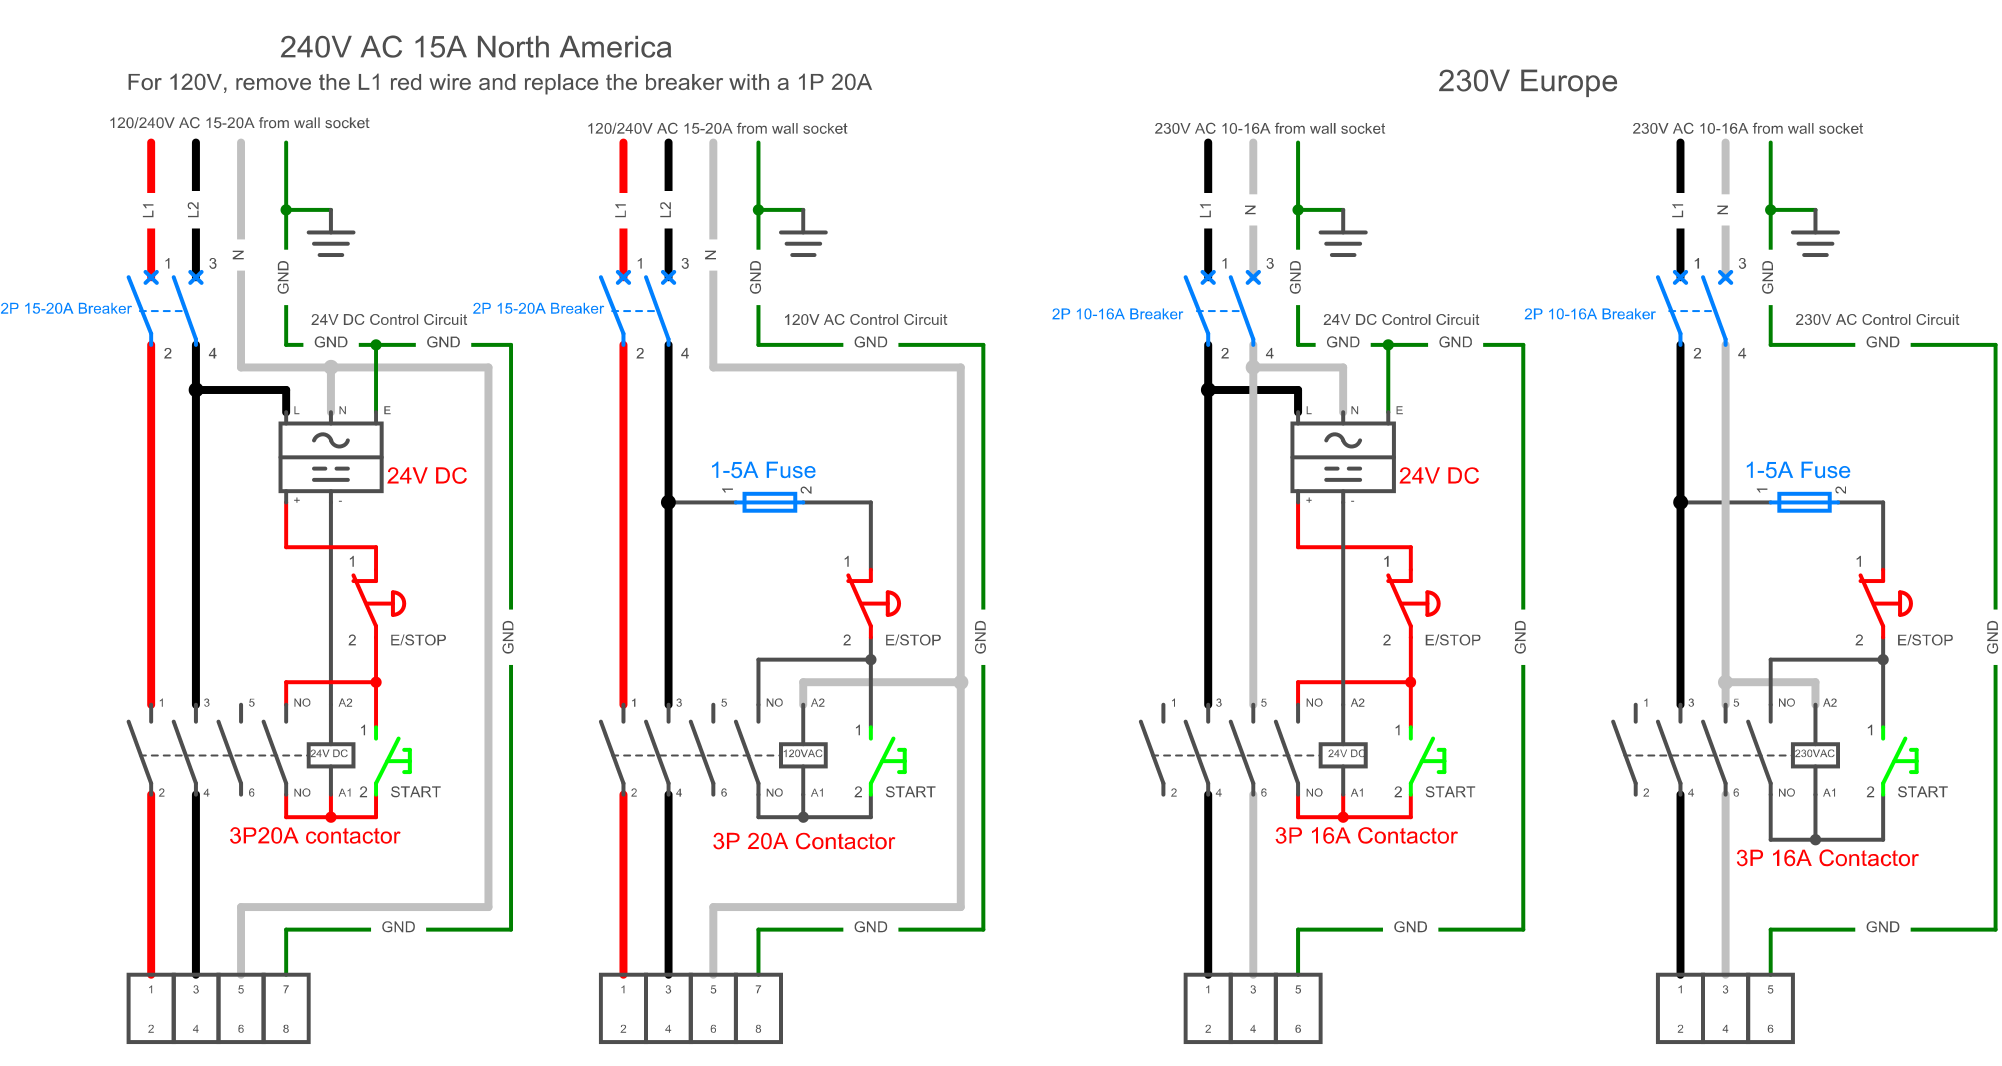 Contactor schematic for North America and Europe